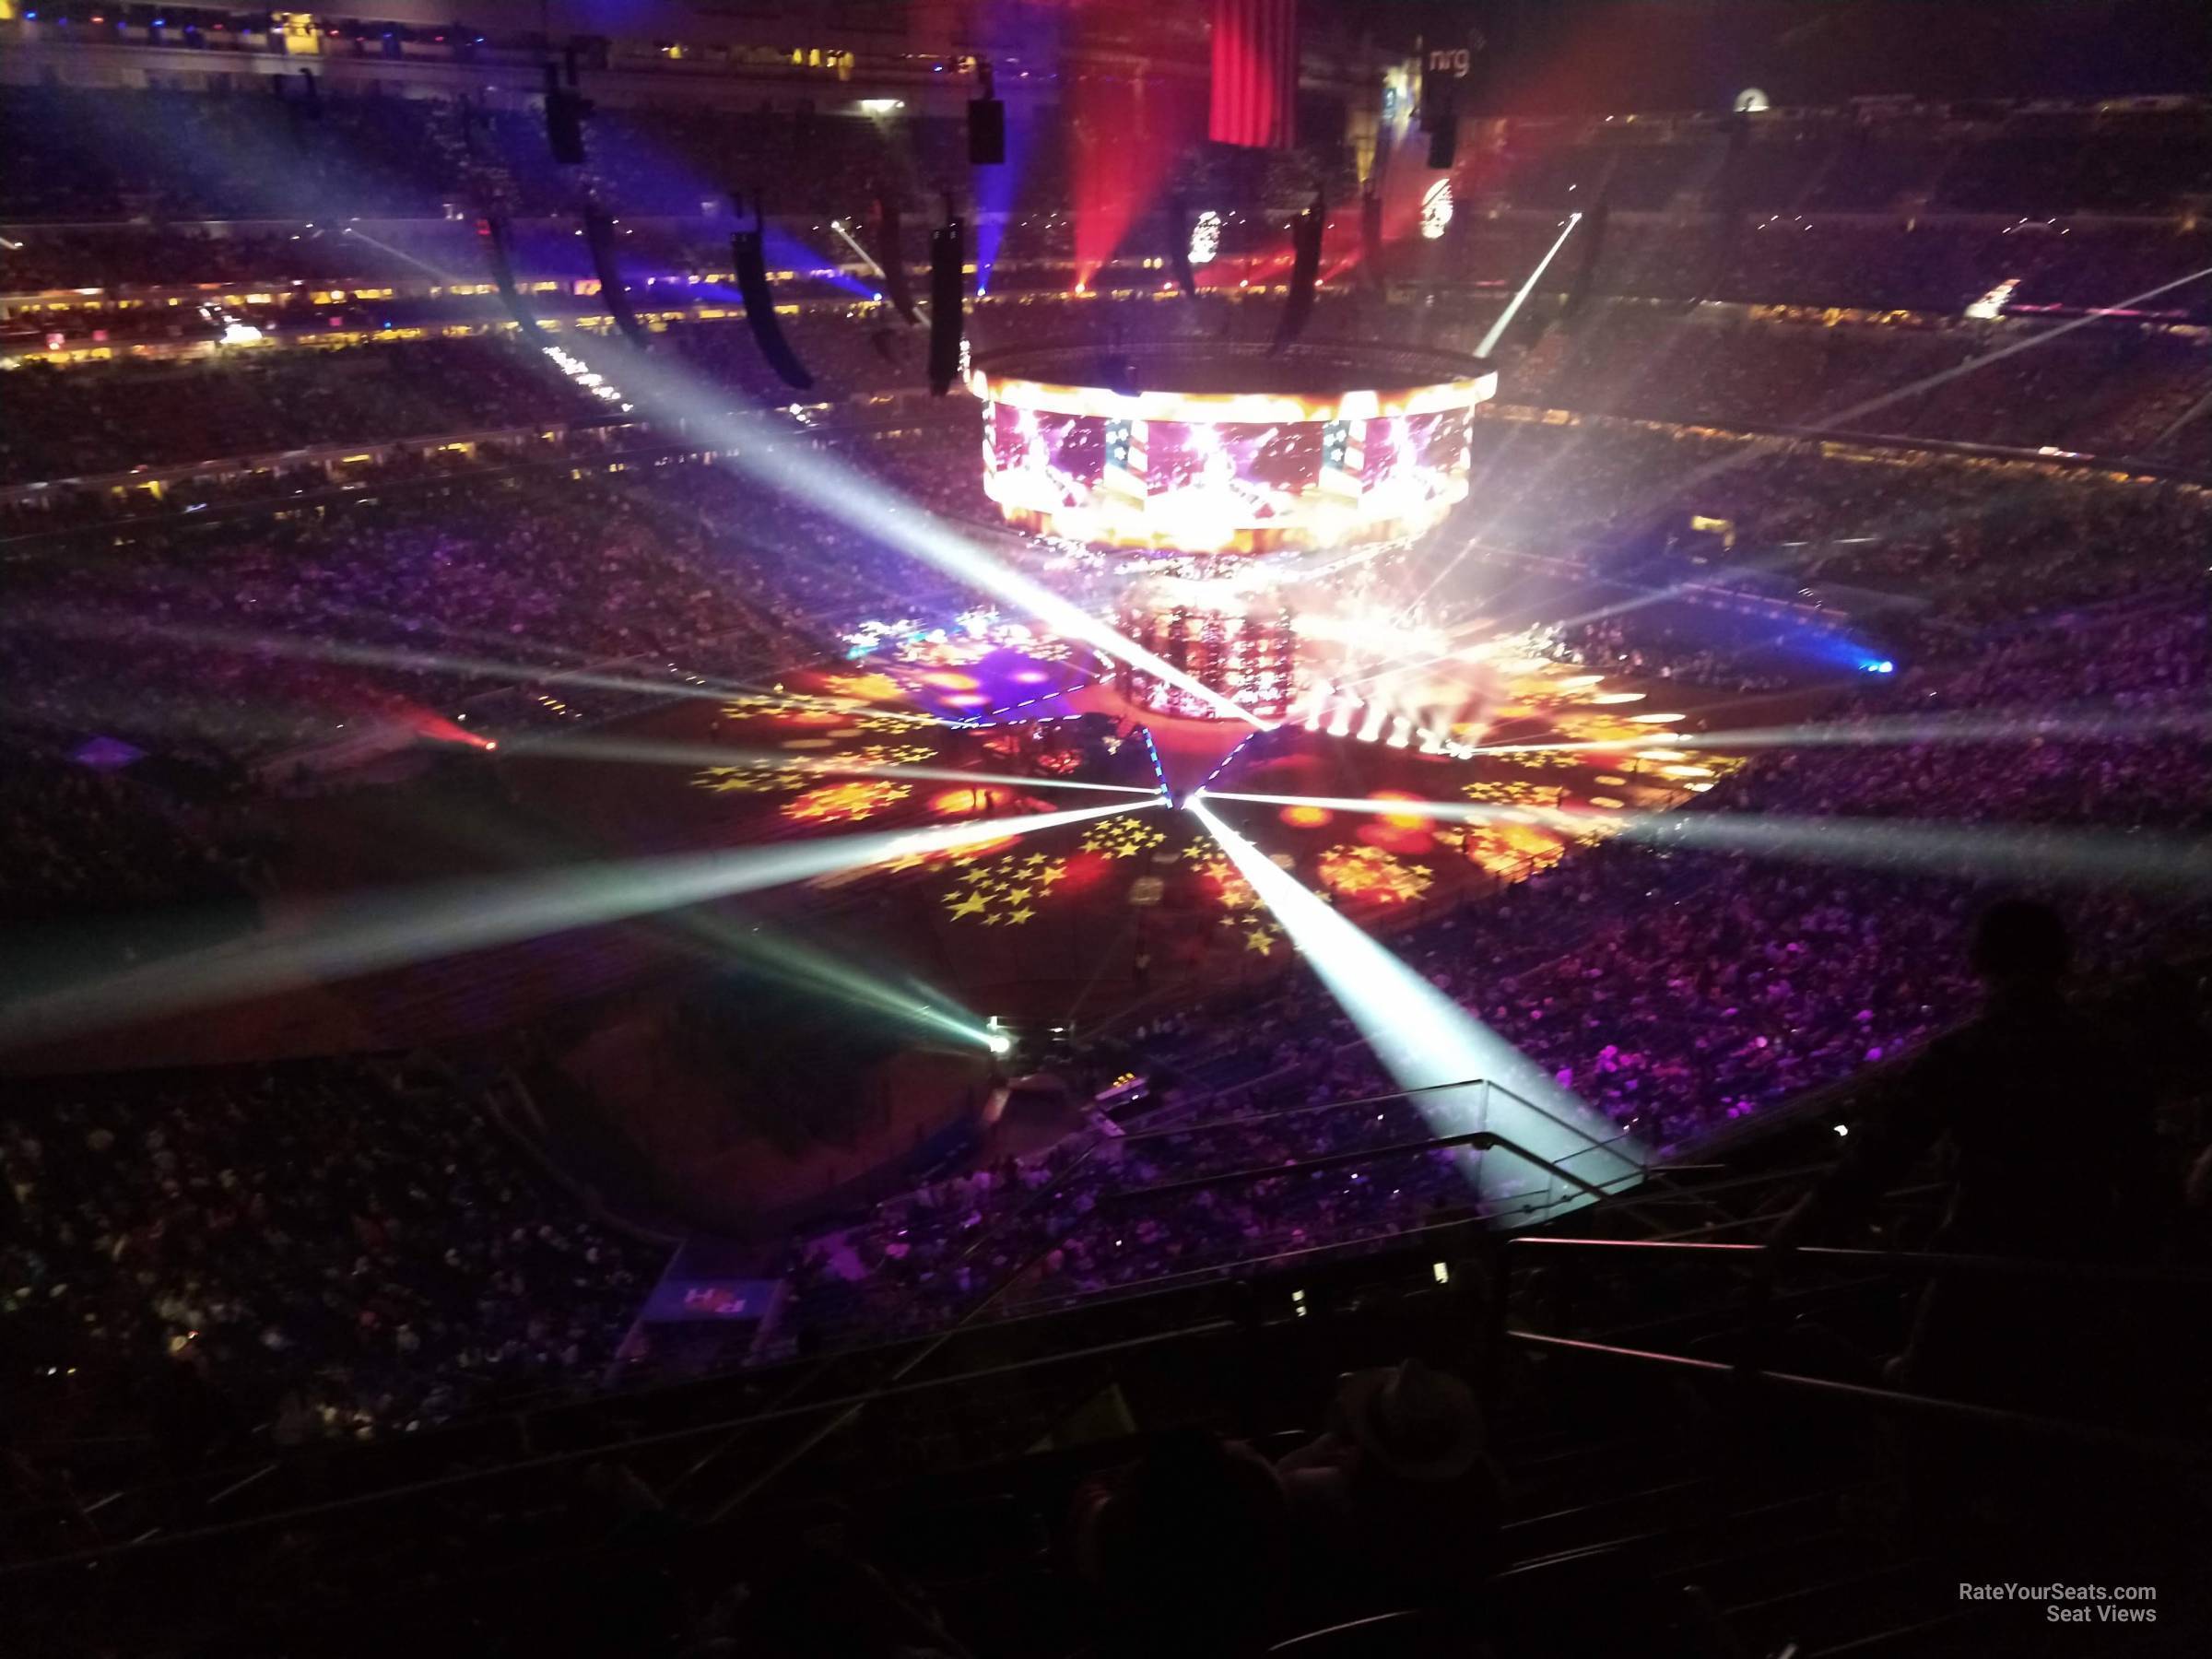 section 641, row h seat view  for concert - nrg stadium